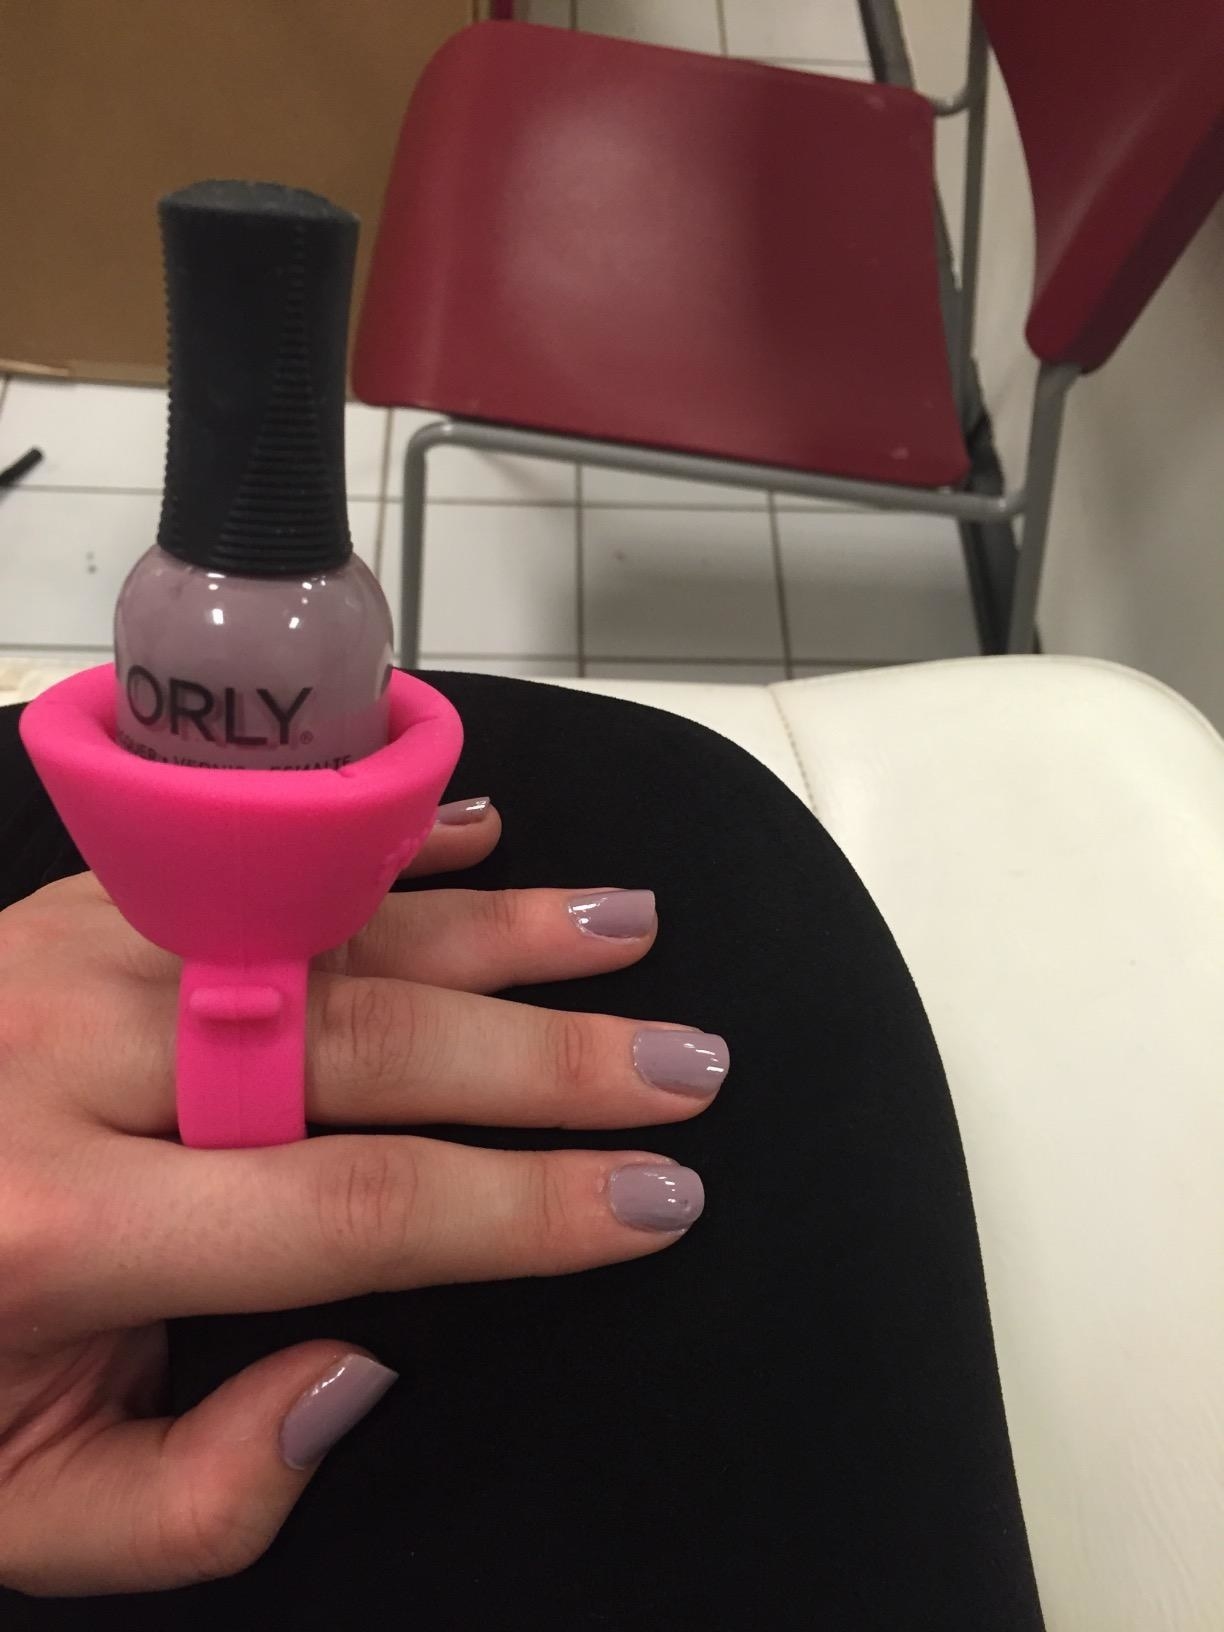 reviewer painting their nails while using the nail polish bottle holder, which is securely on their fingers